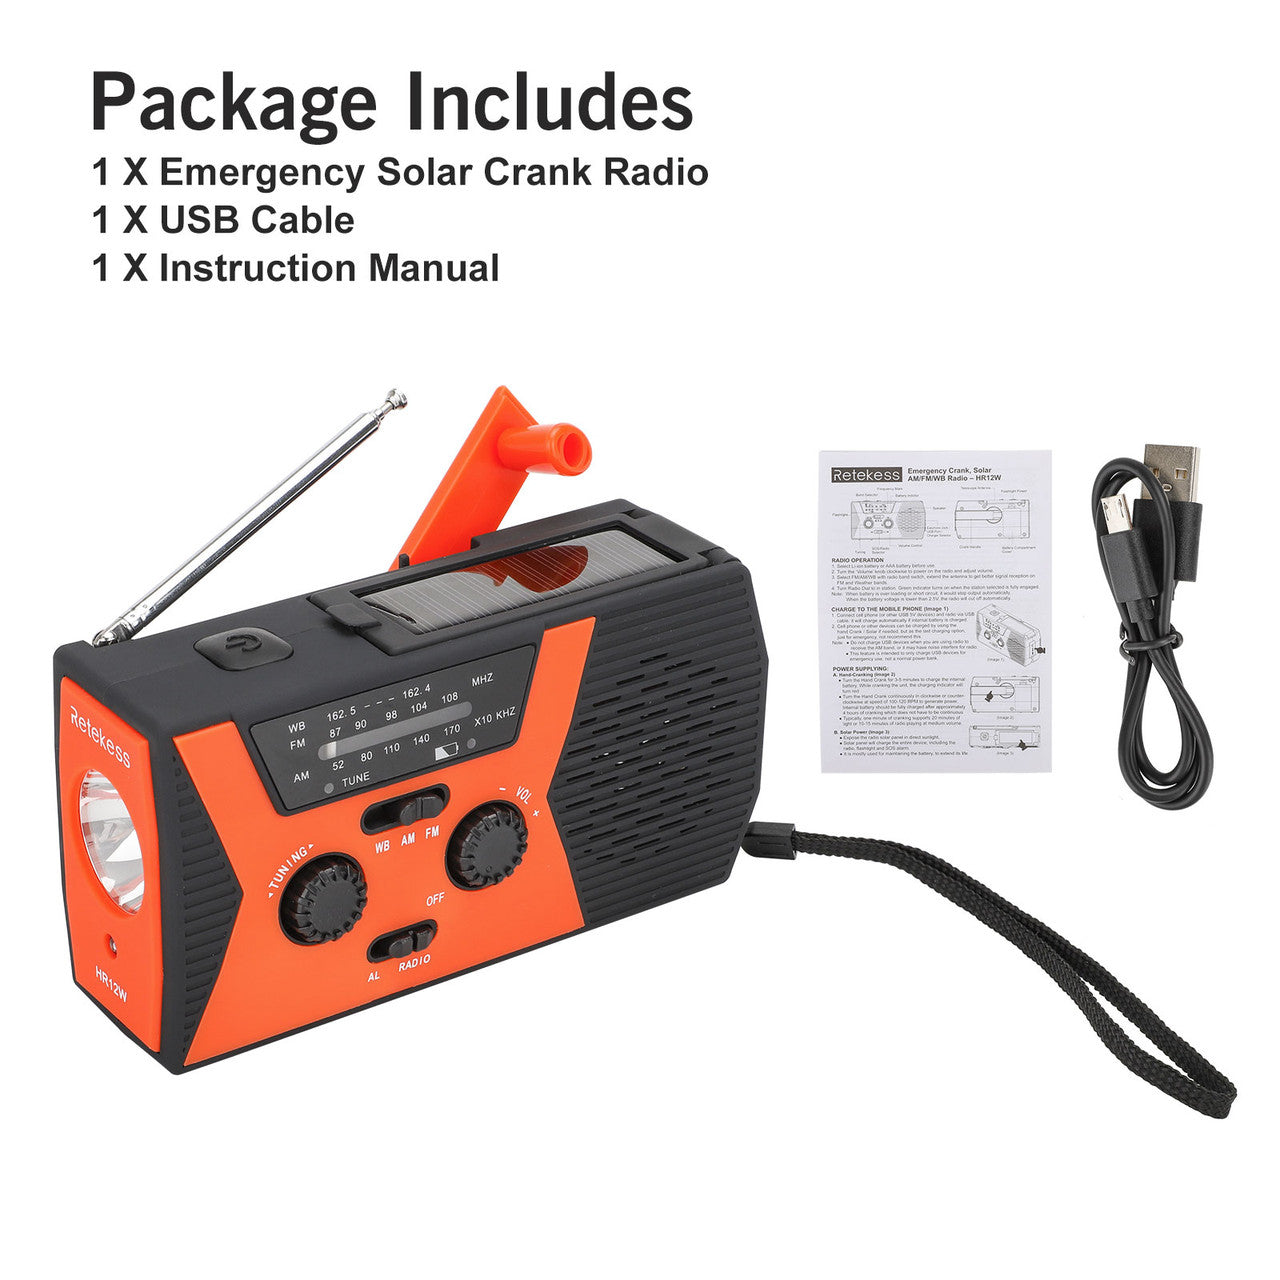 Portable AM/FM NOAA Weather Radio for Outdoor Household Emergency Device, LED Flashlight, Reading Lamp, 2000mAh Power Bank USB Charger SOS Alarm